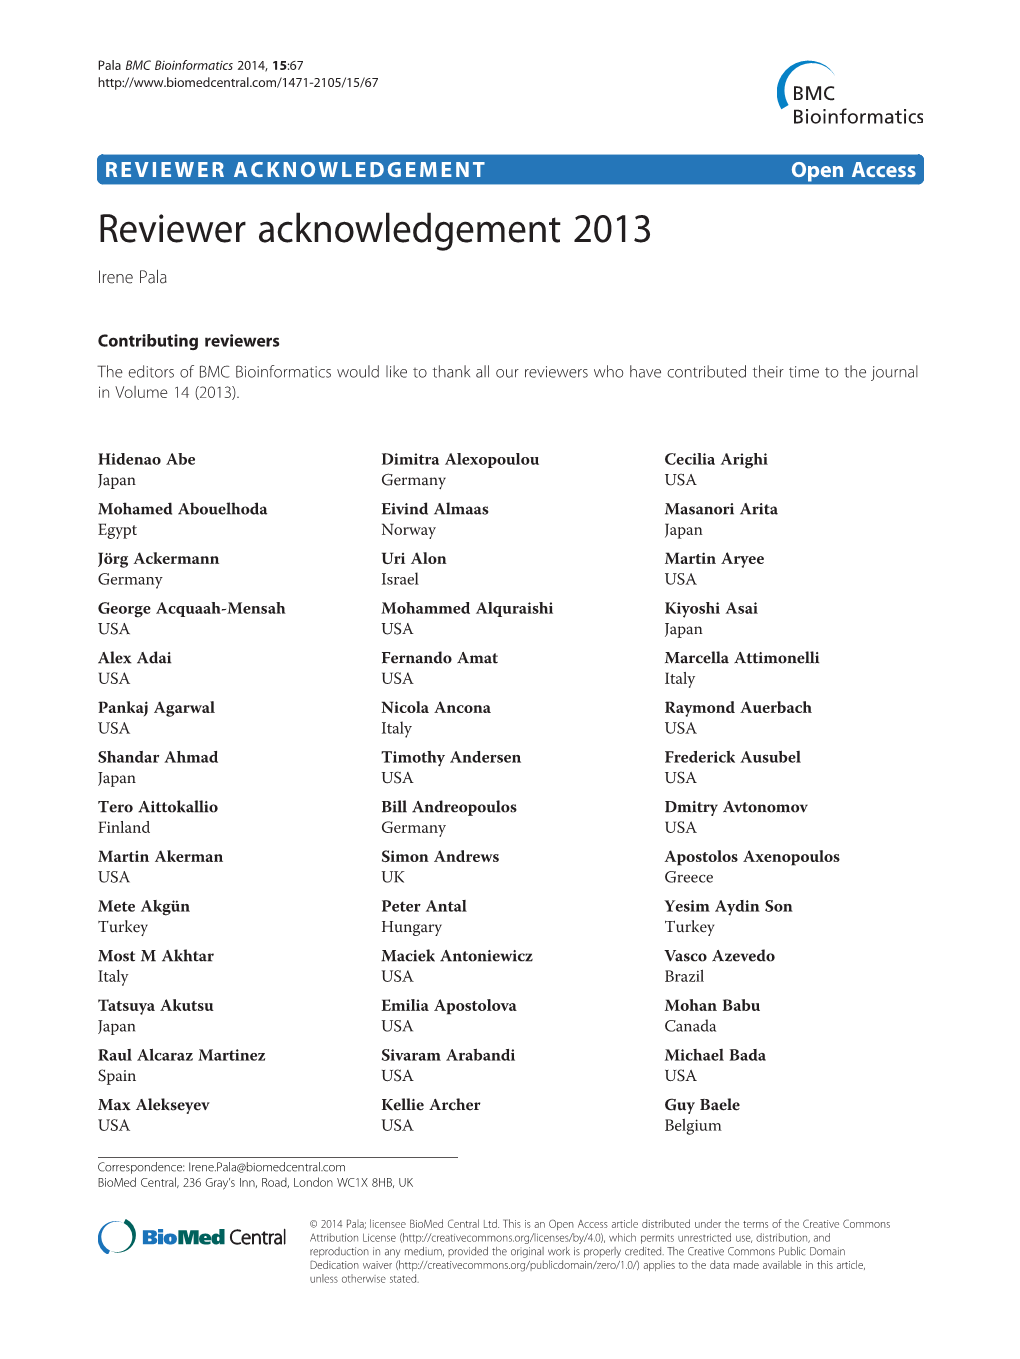 Reviewer Acknowledgement 2013 Irene Pala